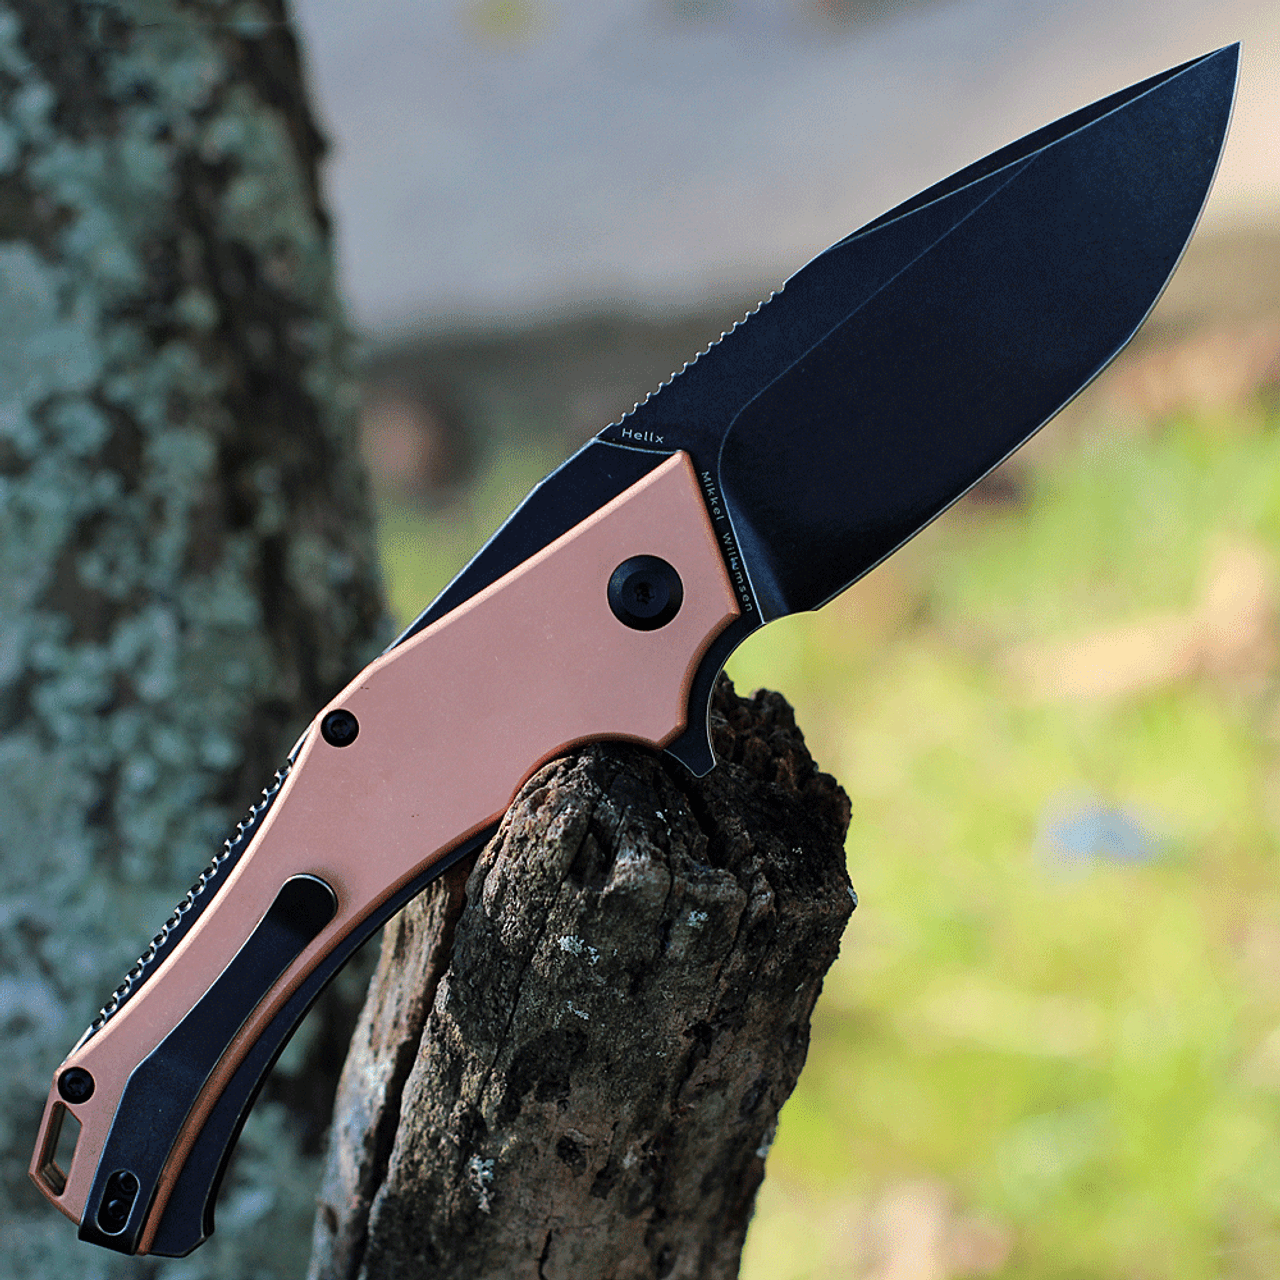 Kansept Knives Hellx (KT1008C1) 3.6" D2 Stonewashed Black Ti Coated Drop Point Blade, Red Copper and Blue Anodized Stainless Steel Handle